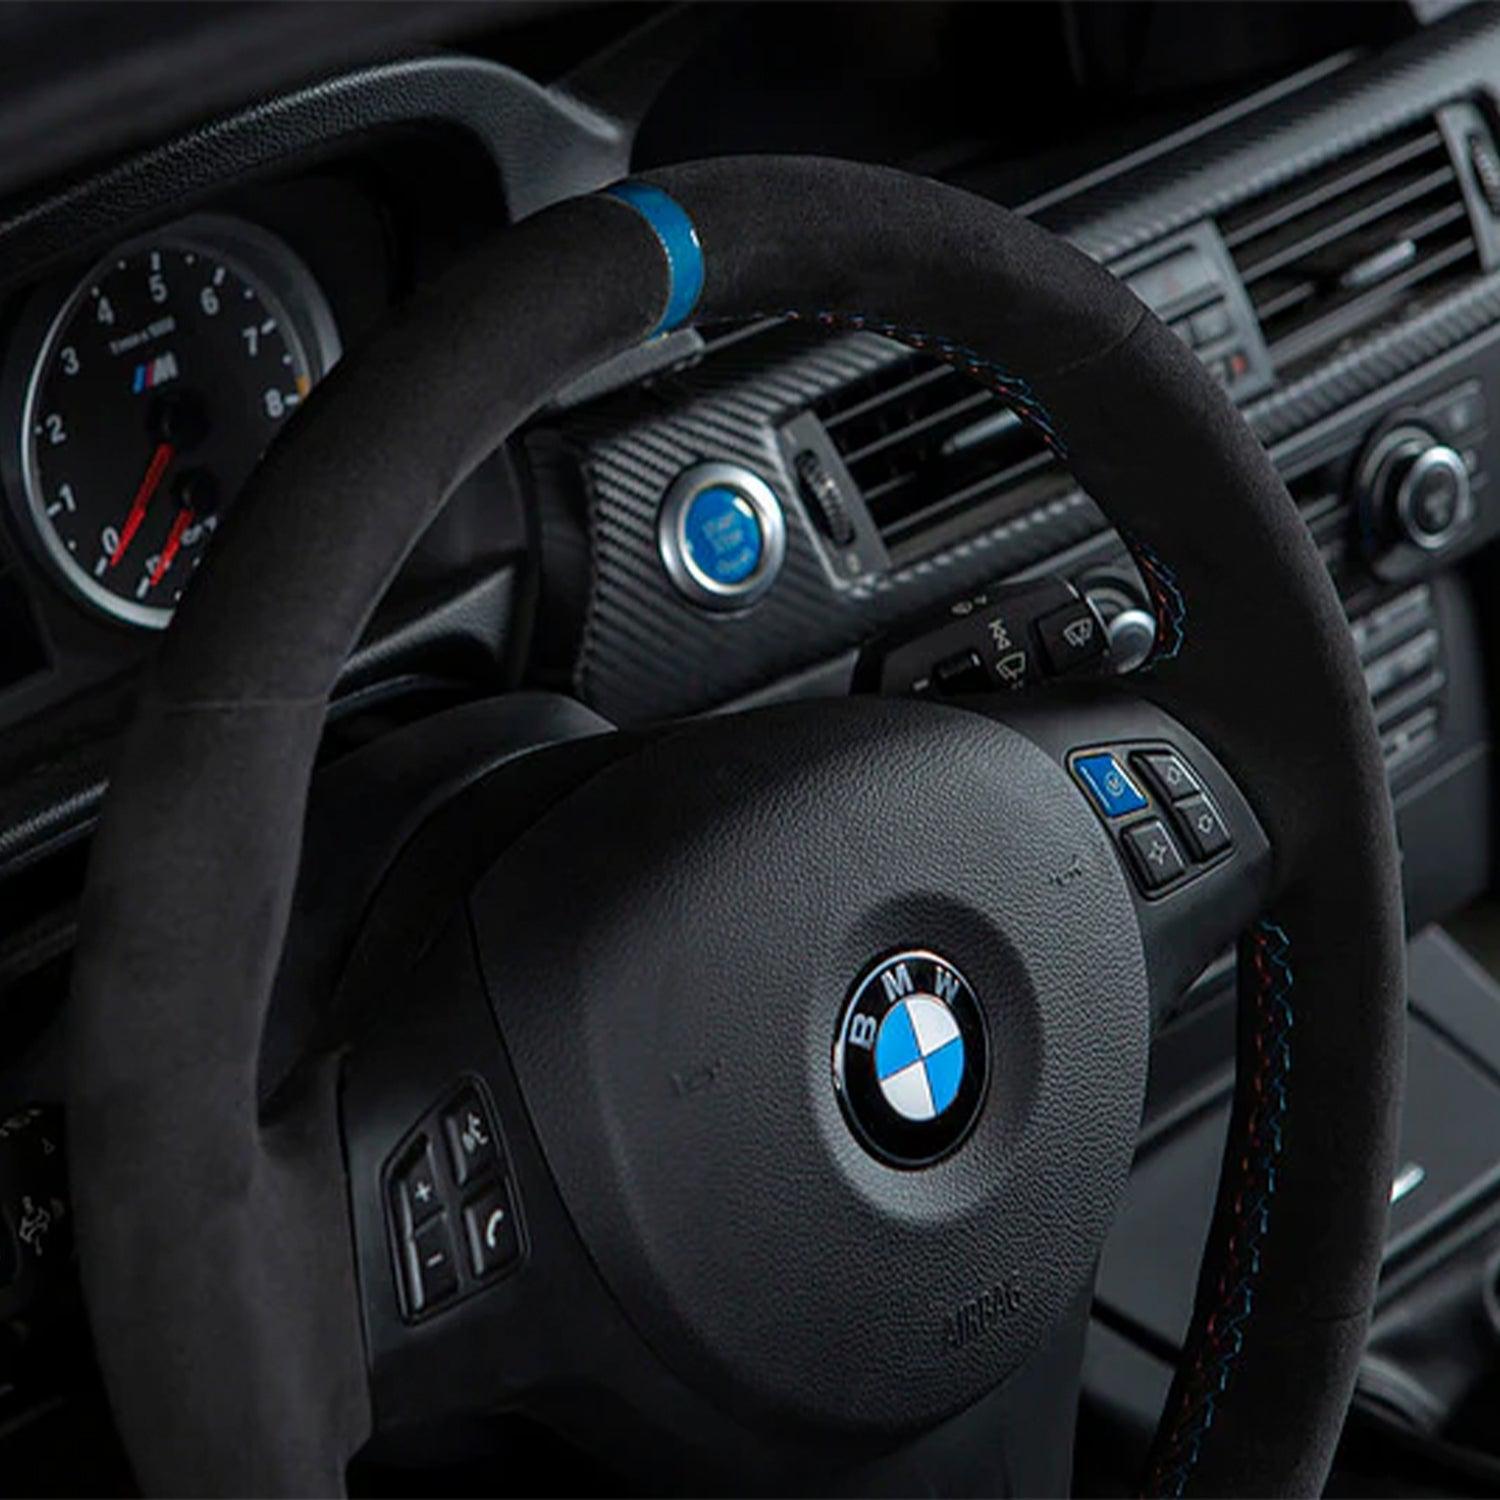 IND BMW M3/3 Series Start-Stop Engine Button In Blue (E90/E92/E93)-R44 Performance